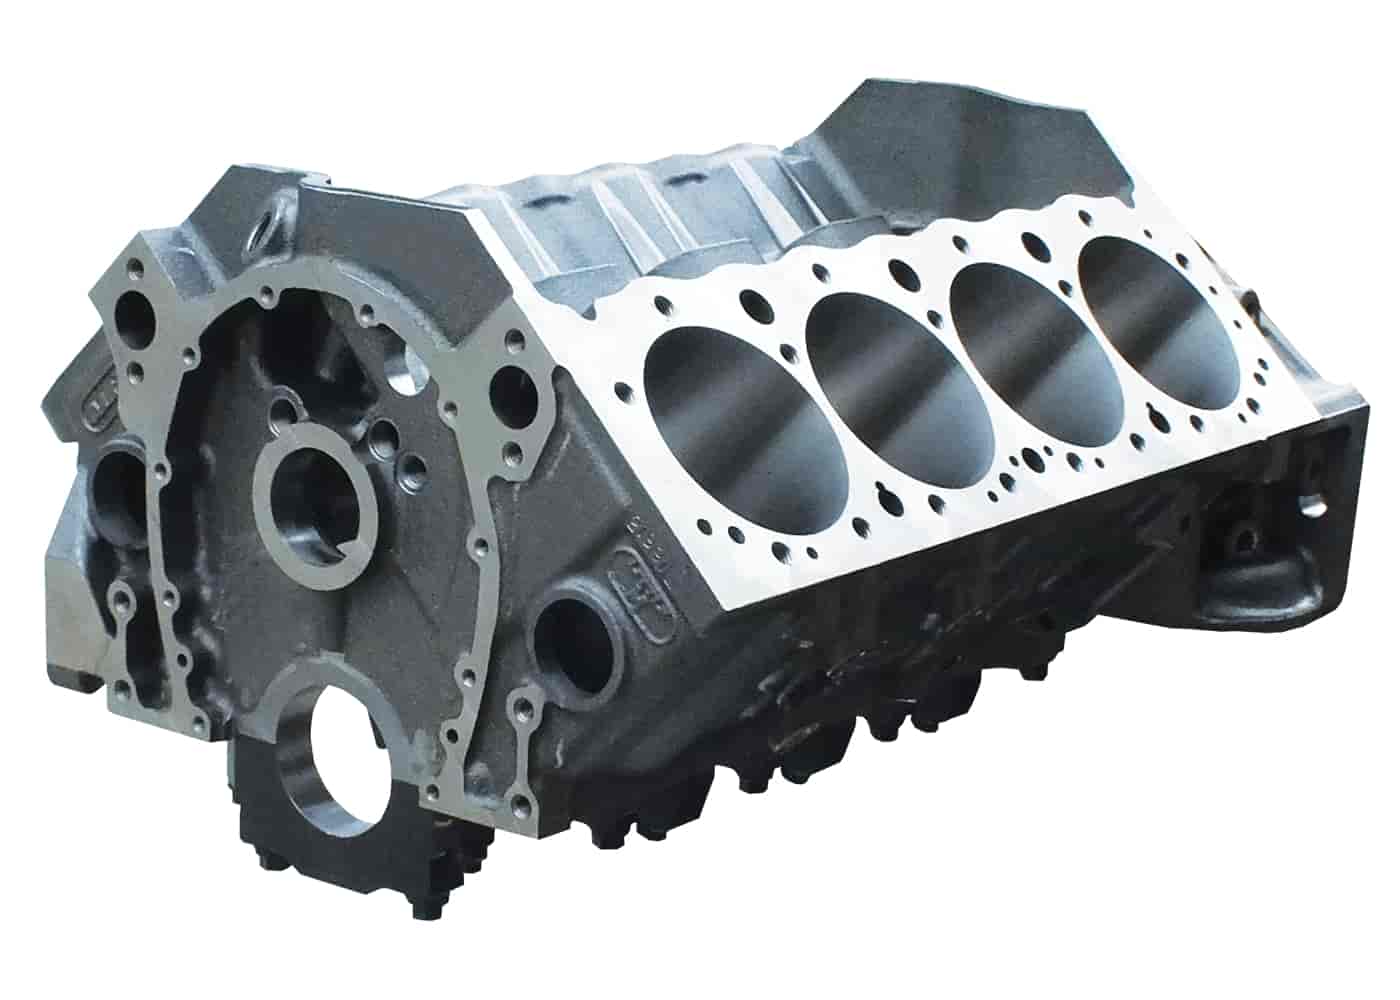 Little M Engine Block Small Block Chevy 9.500 in. Deck, +.391 in. Raised Camshaft